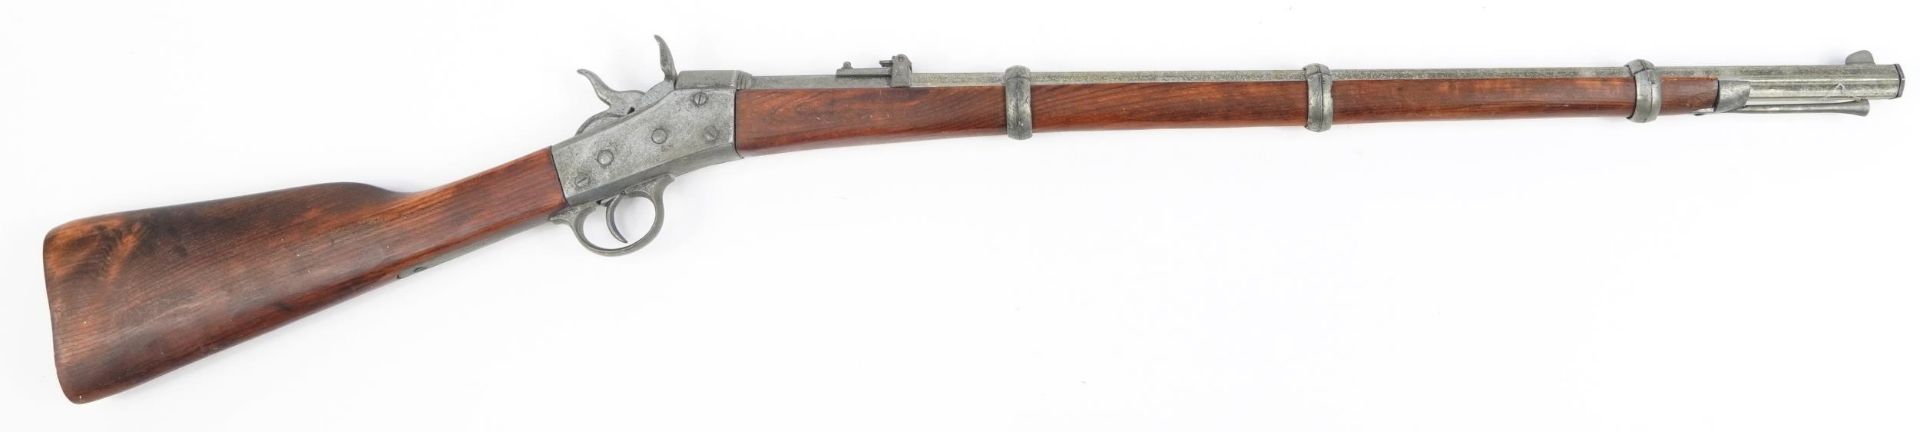 Decorative percussion rifle, 113cm in length